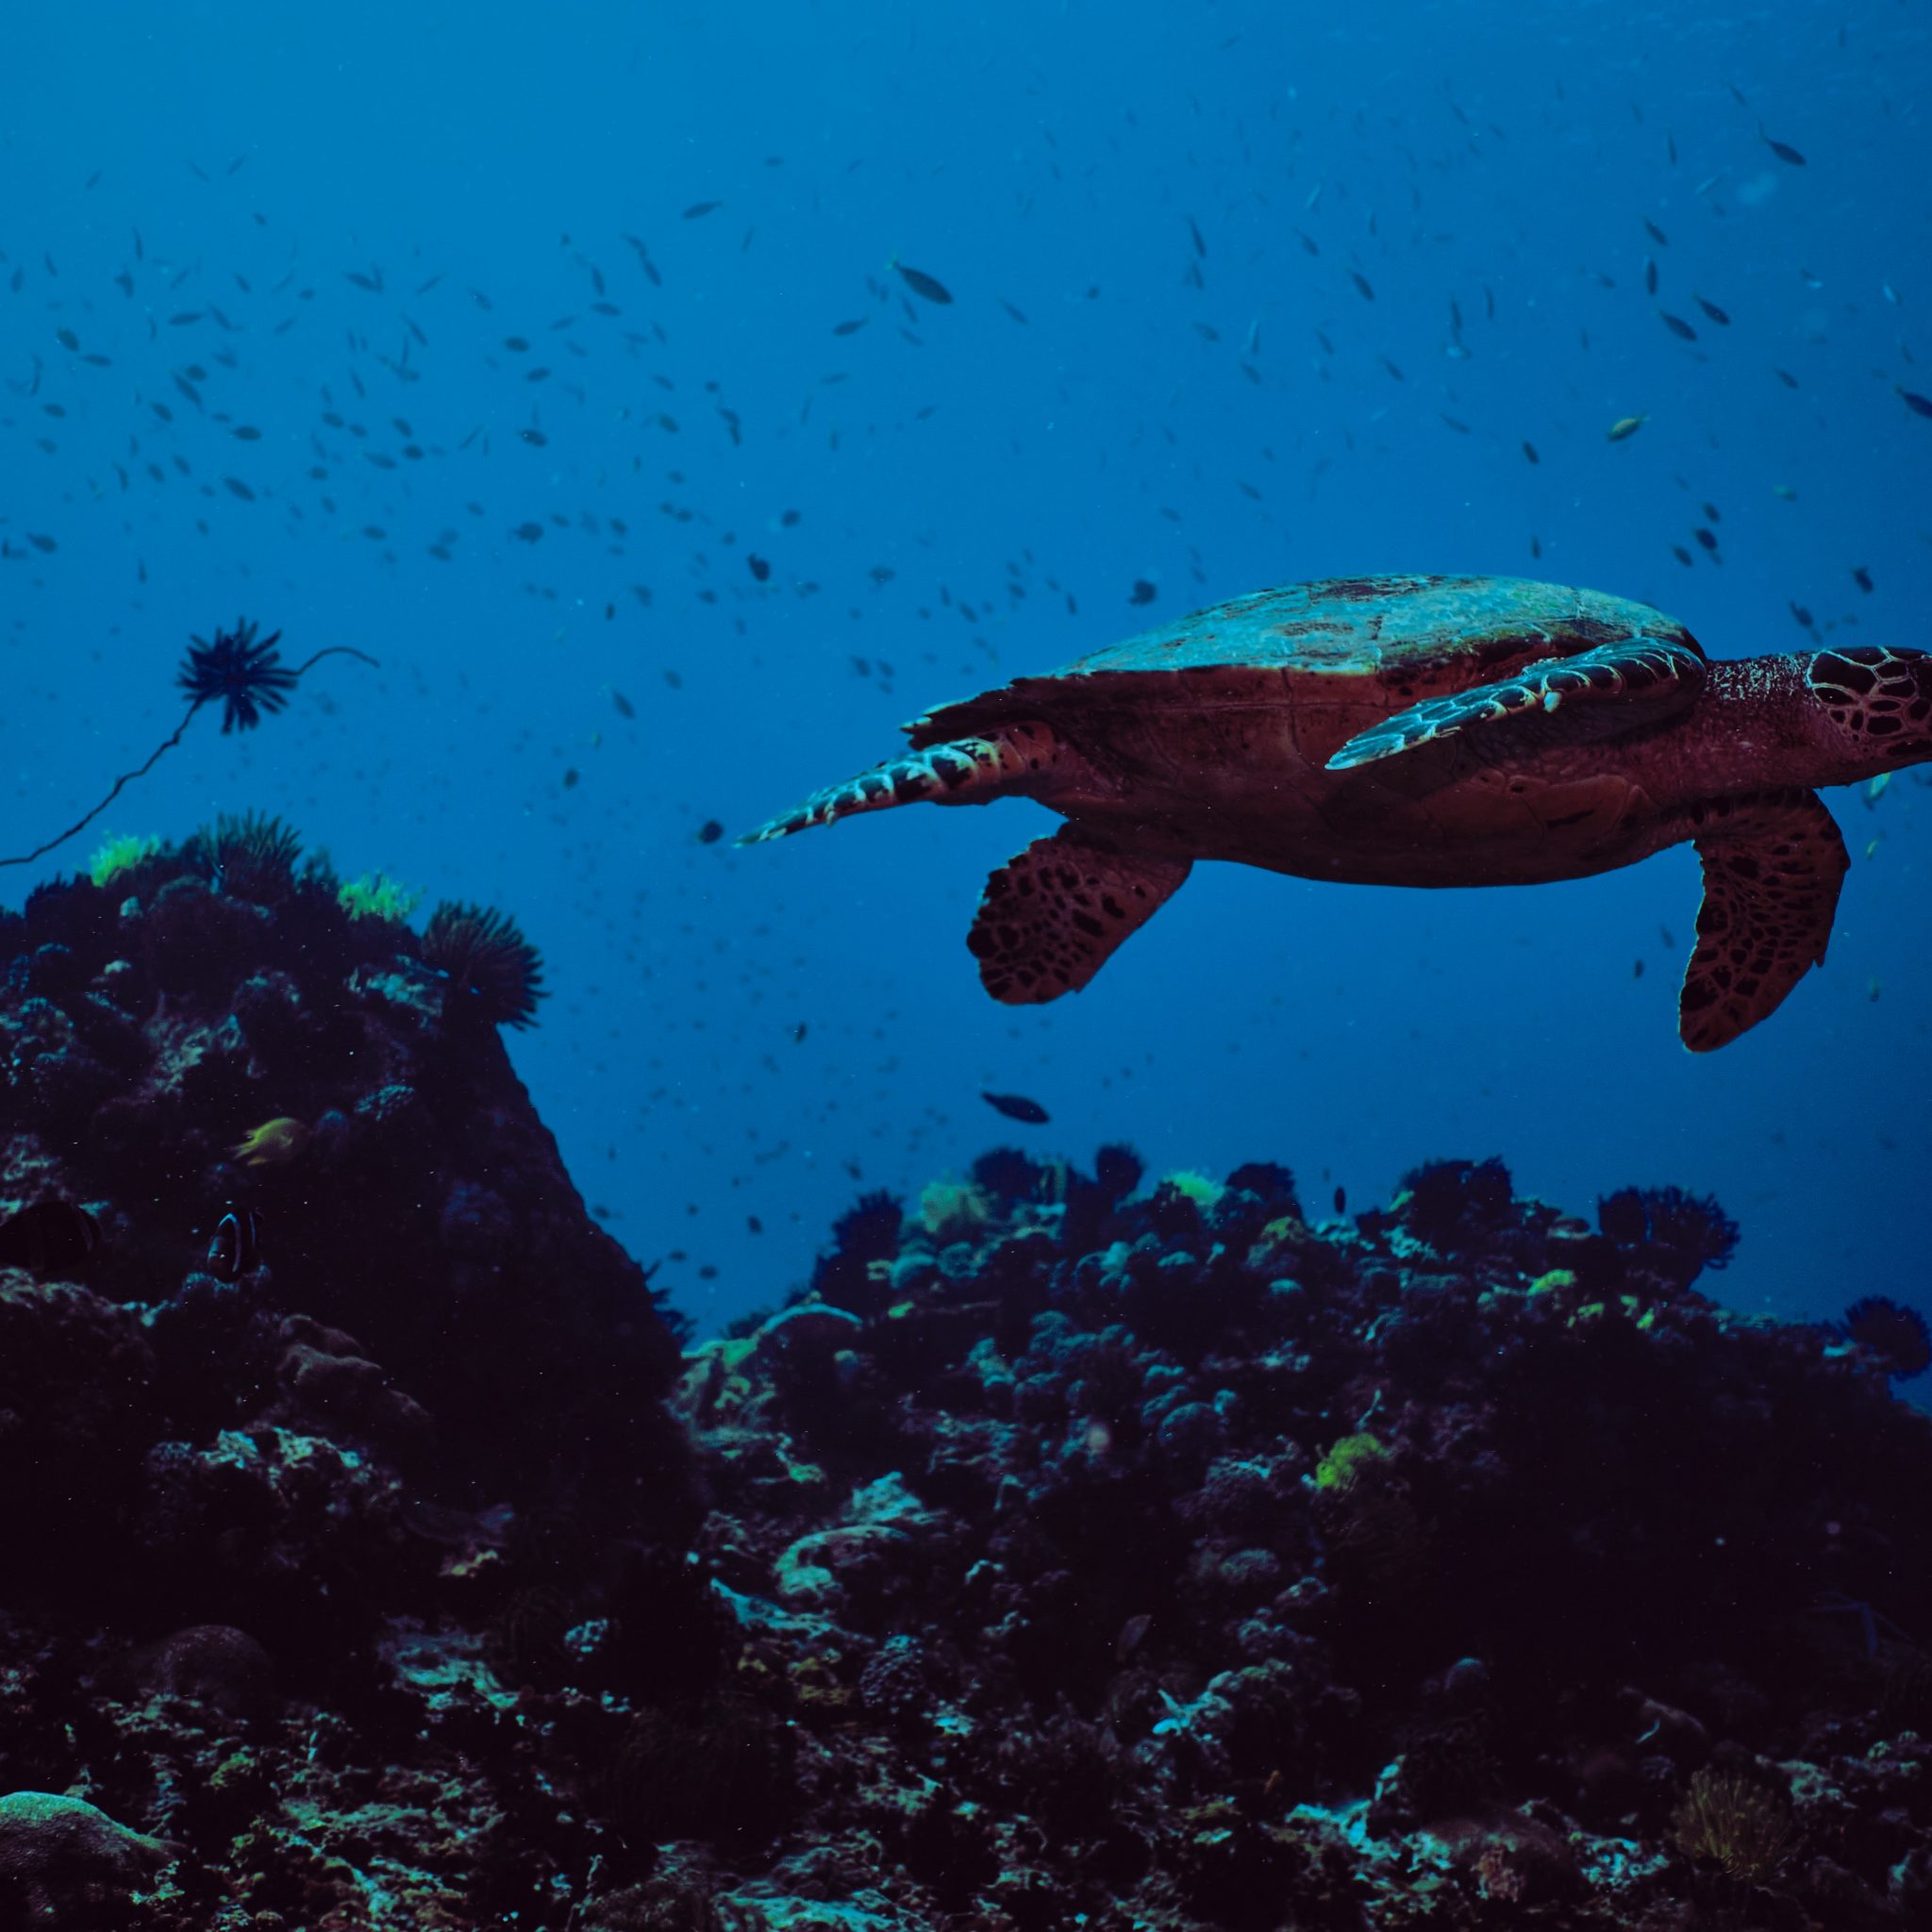 The best diving spots in the world with a turtle swimming in the dark blue sea.